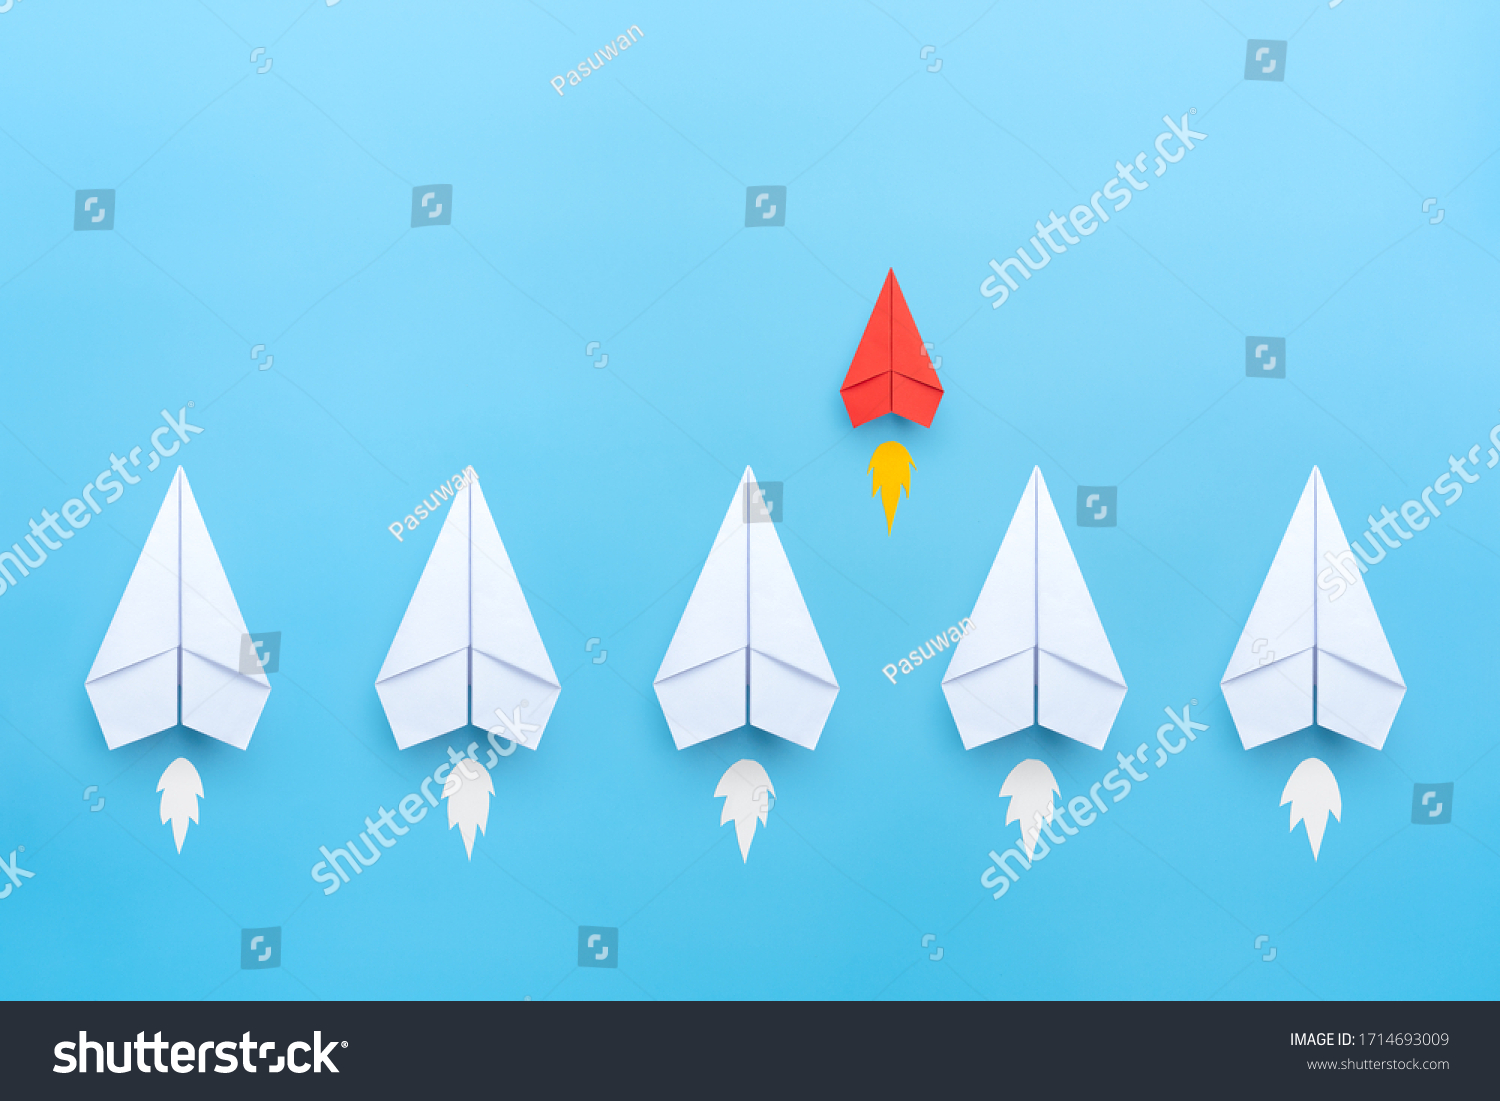 Small business concept with small red paper plane on blue background #1714693009